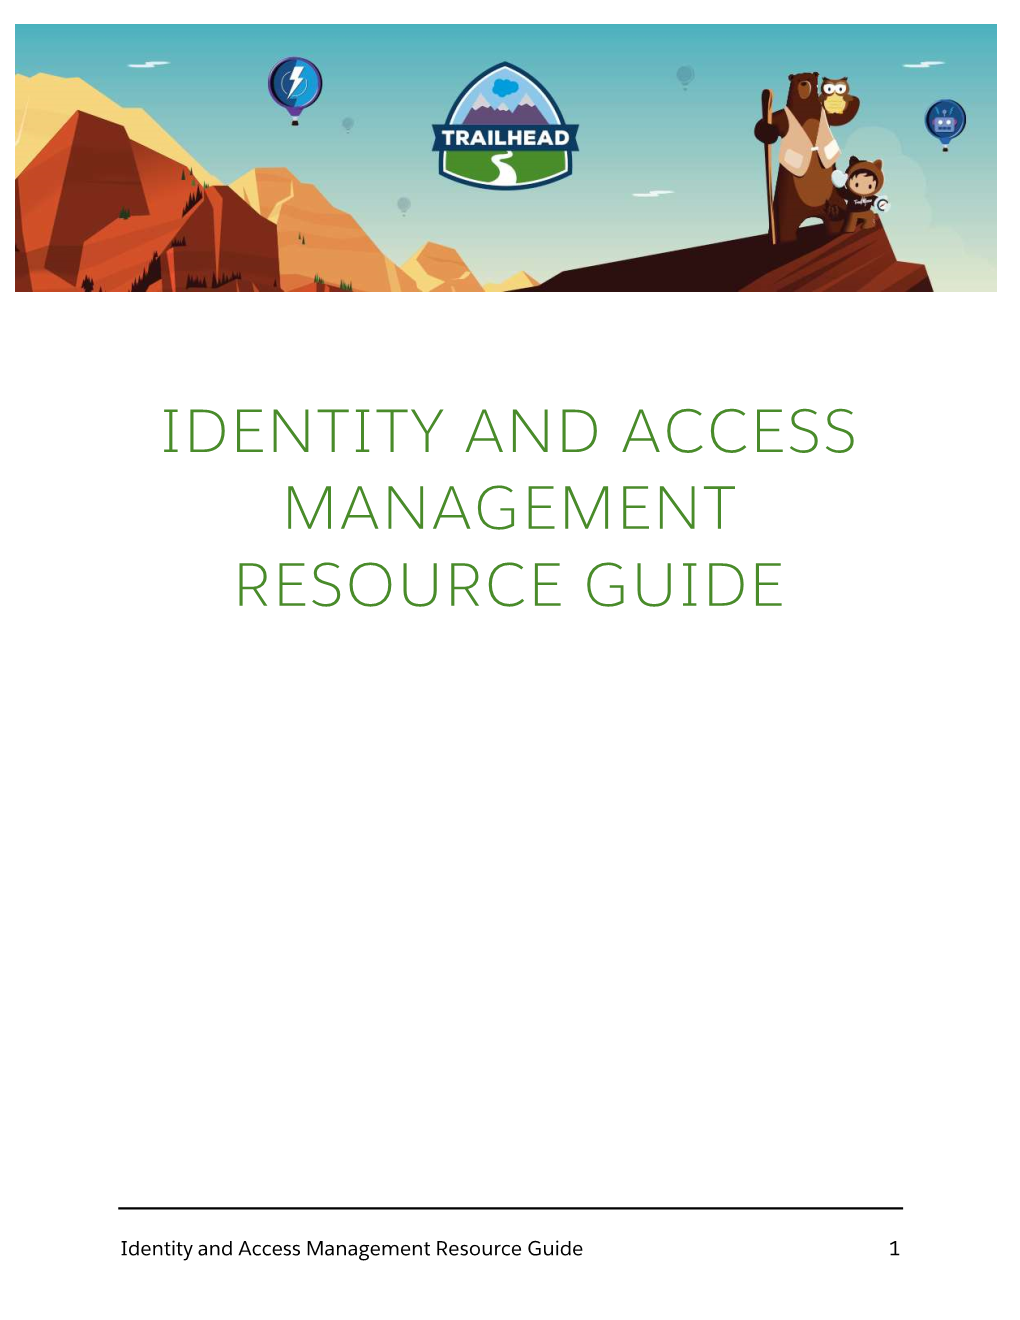 Identity and Access Management Resource Guide